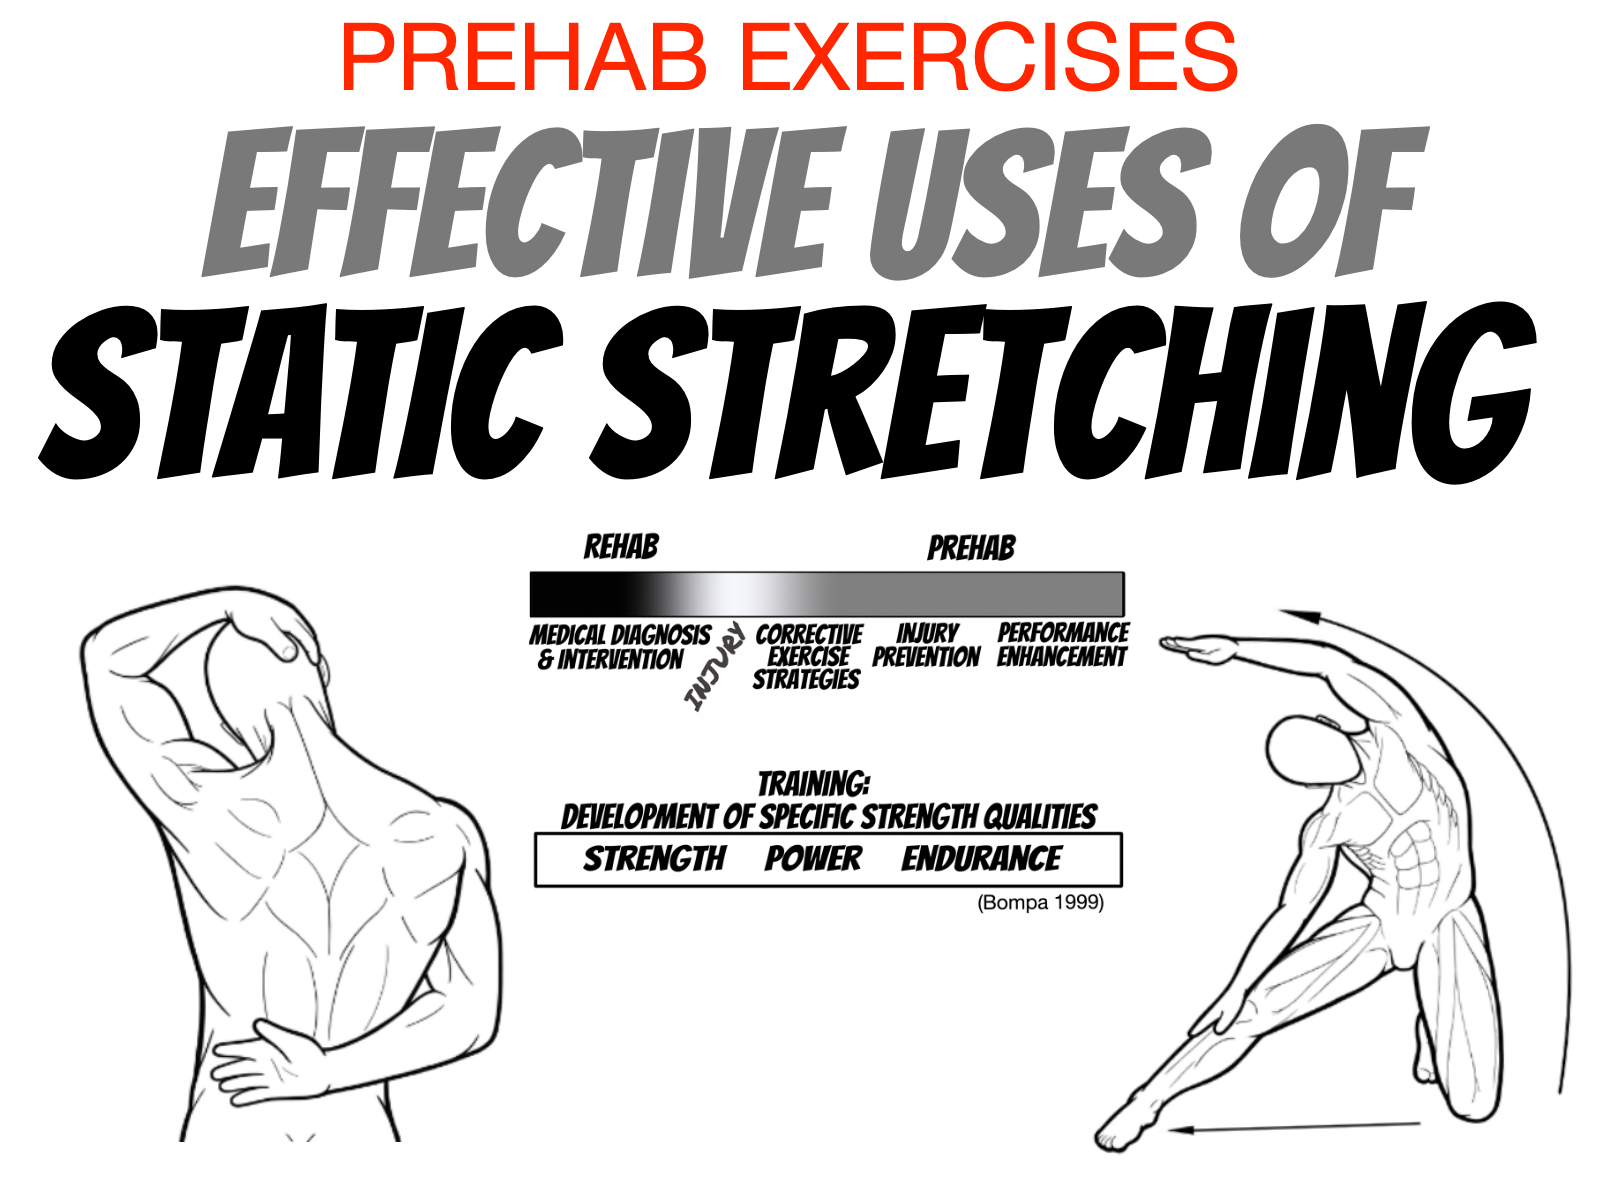 Narrative Review: Uses for Static Stretching in Rehab, Prehab and Training